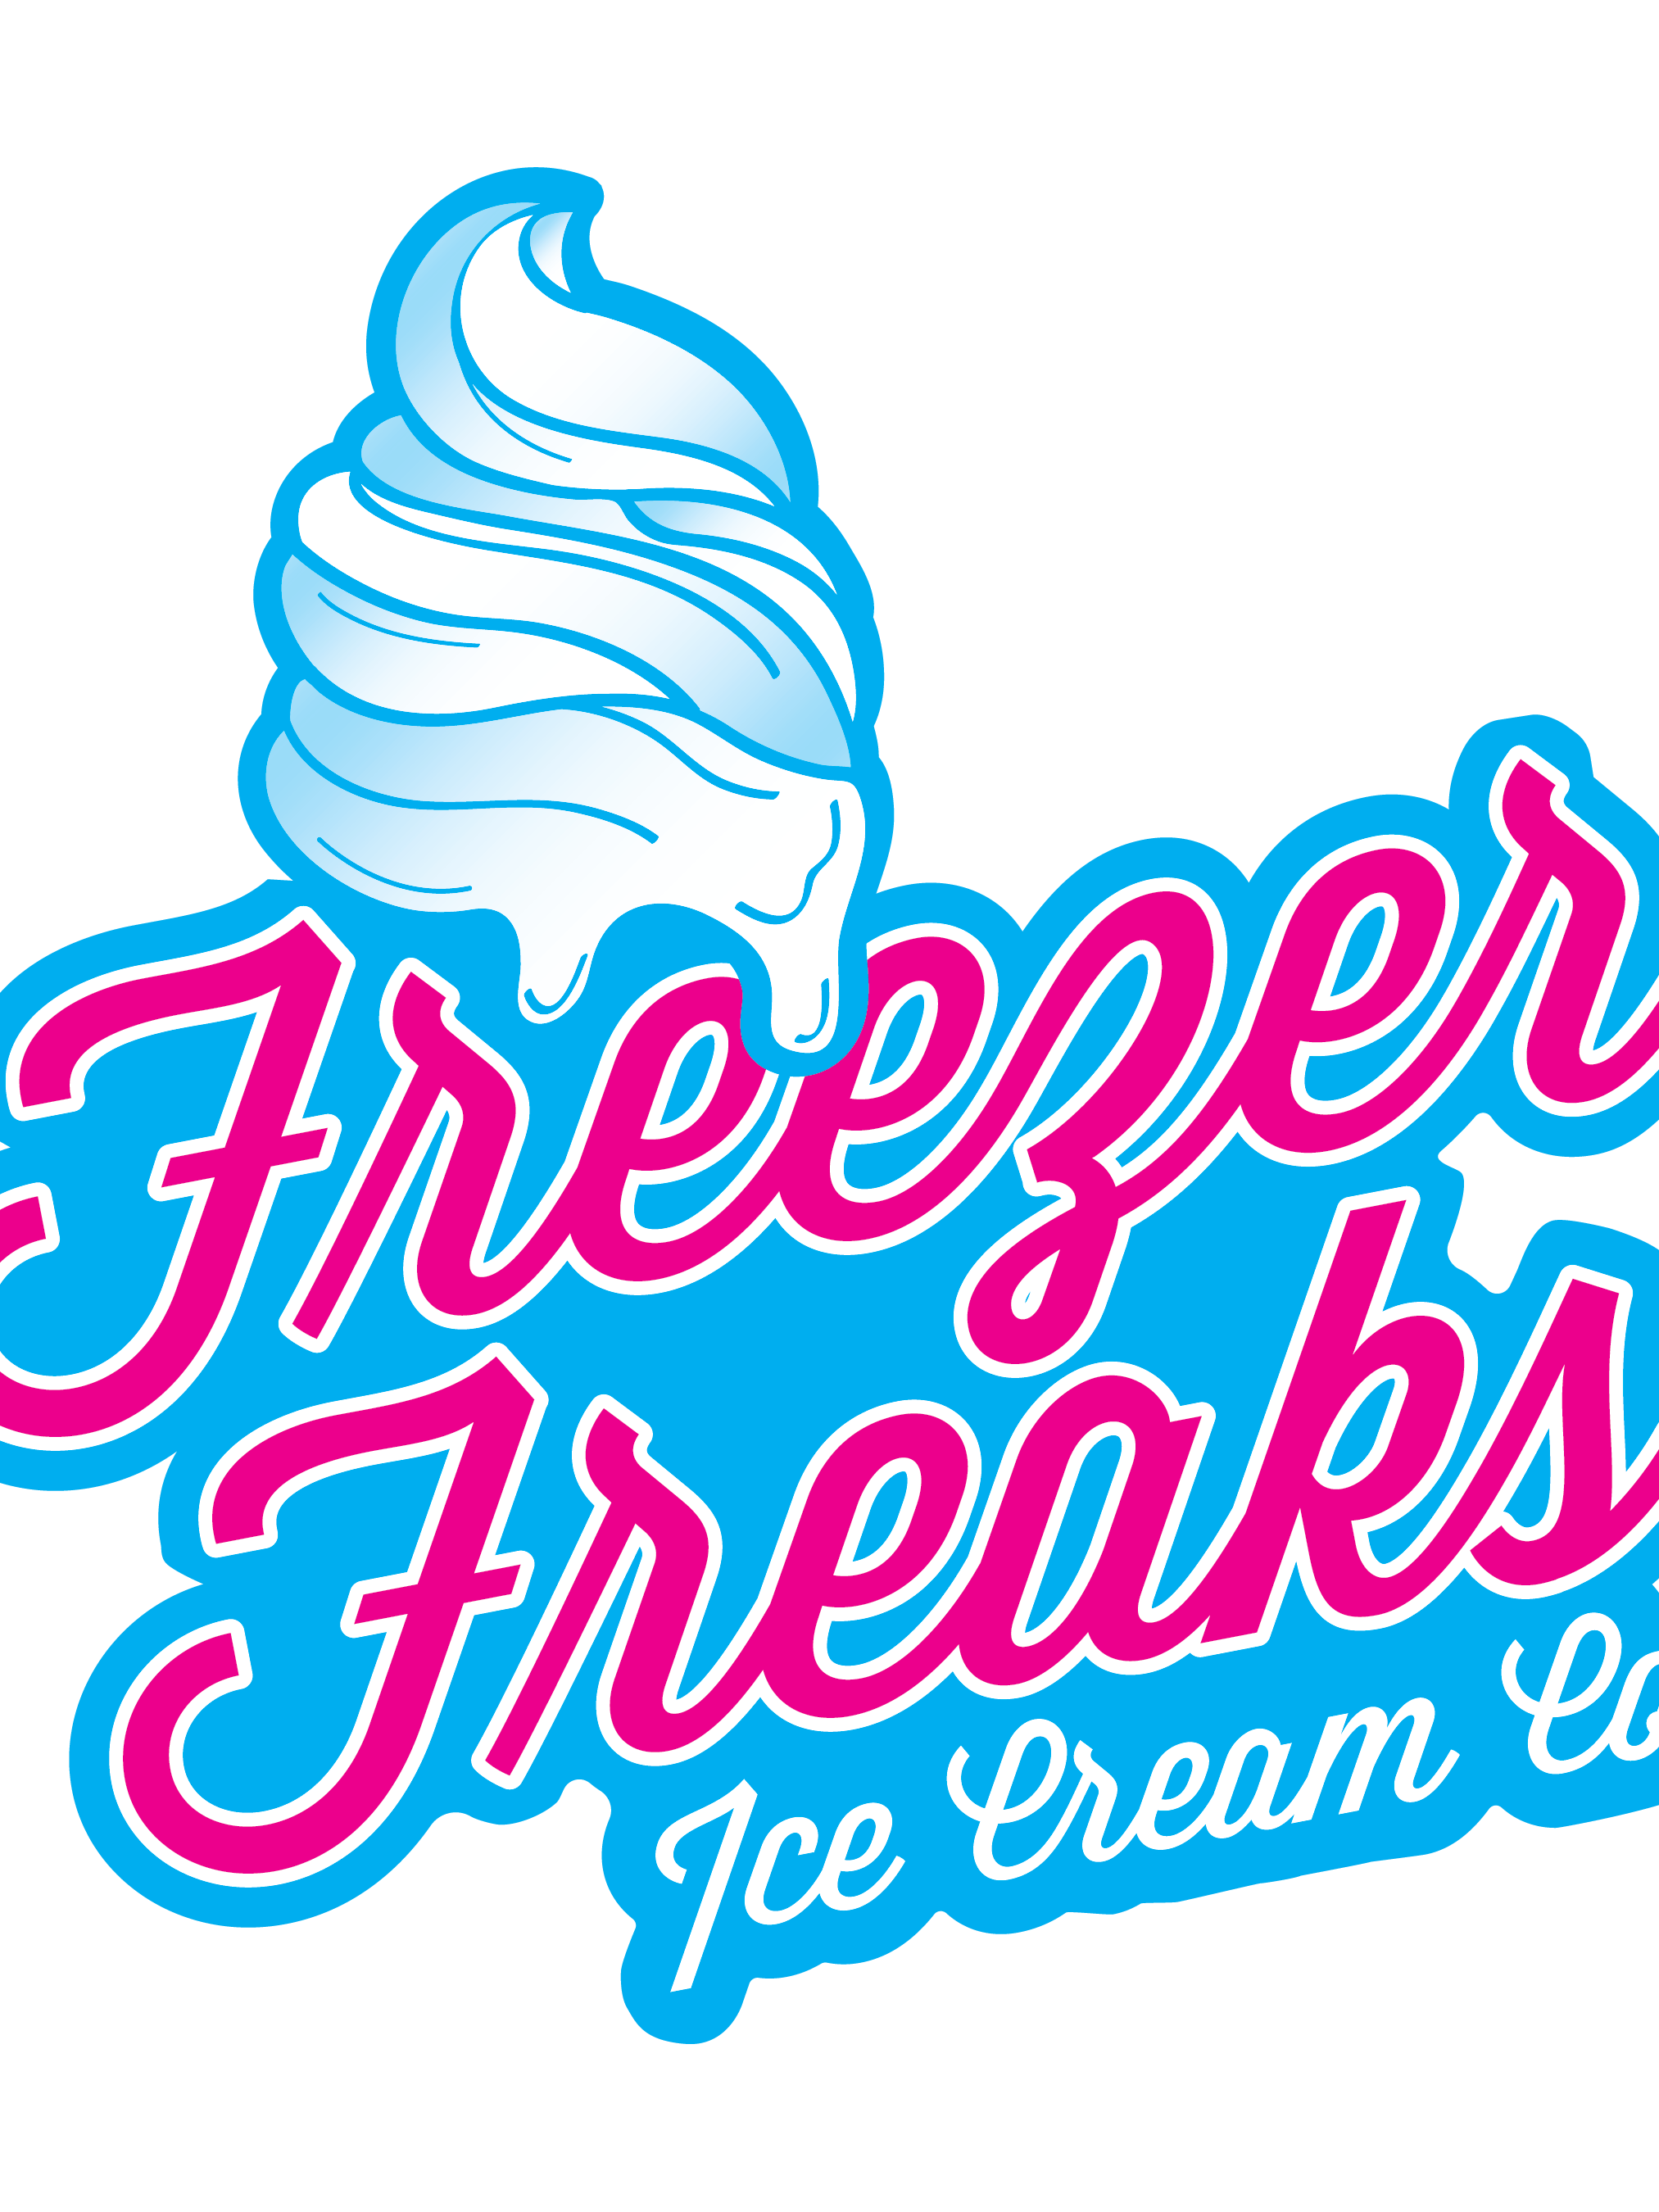 Download Andre Romious Freezer Freaks